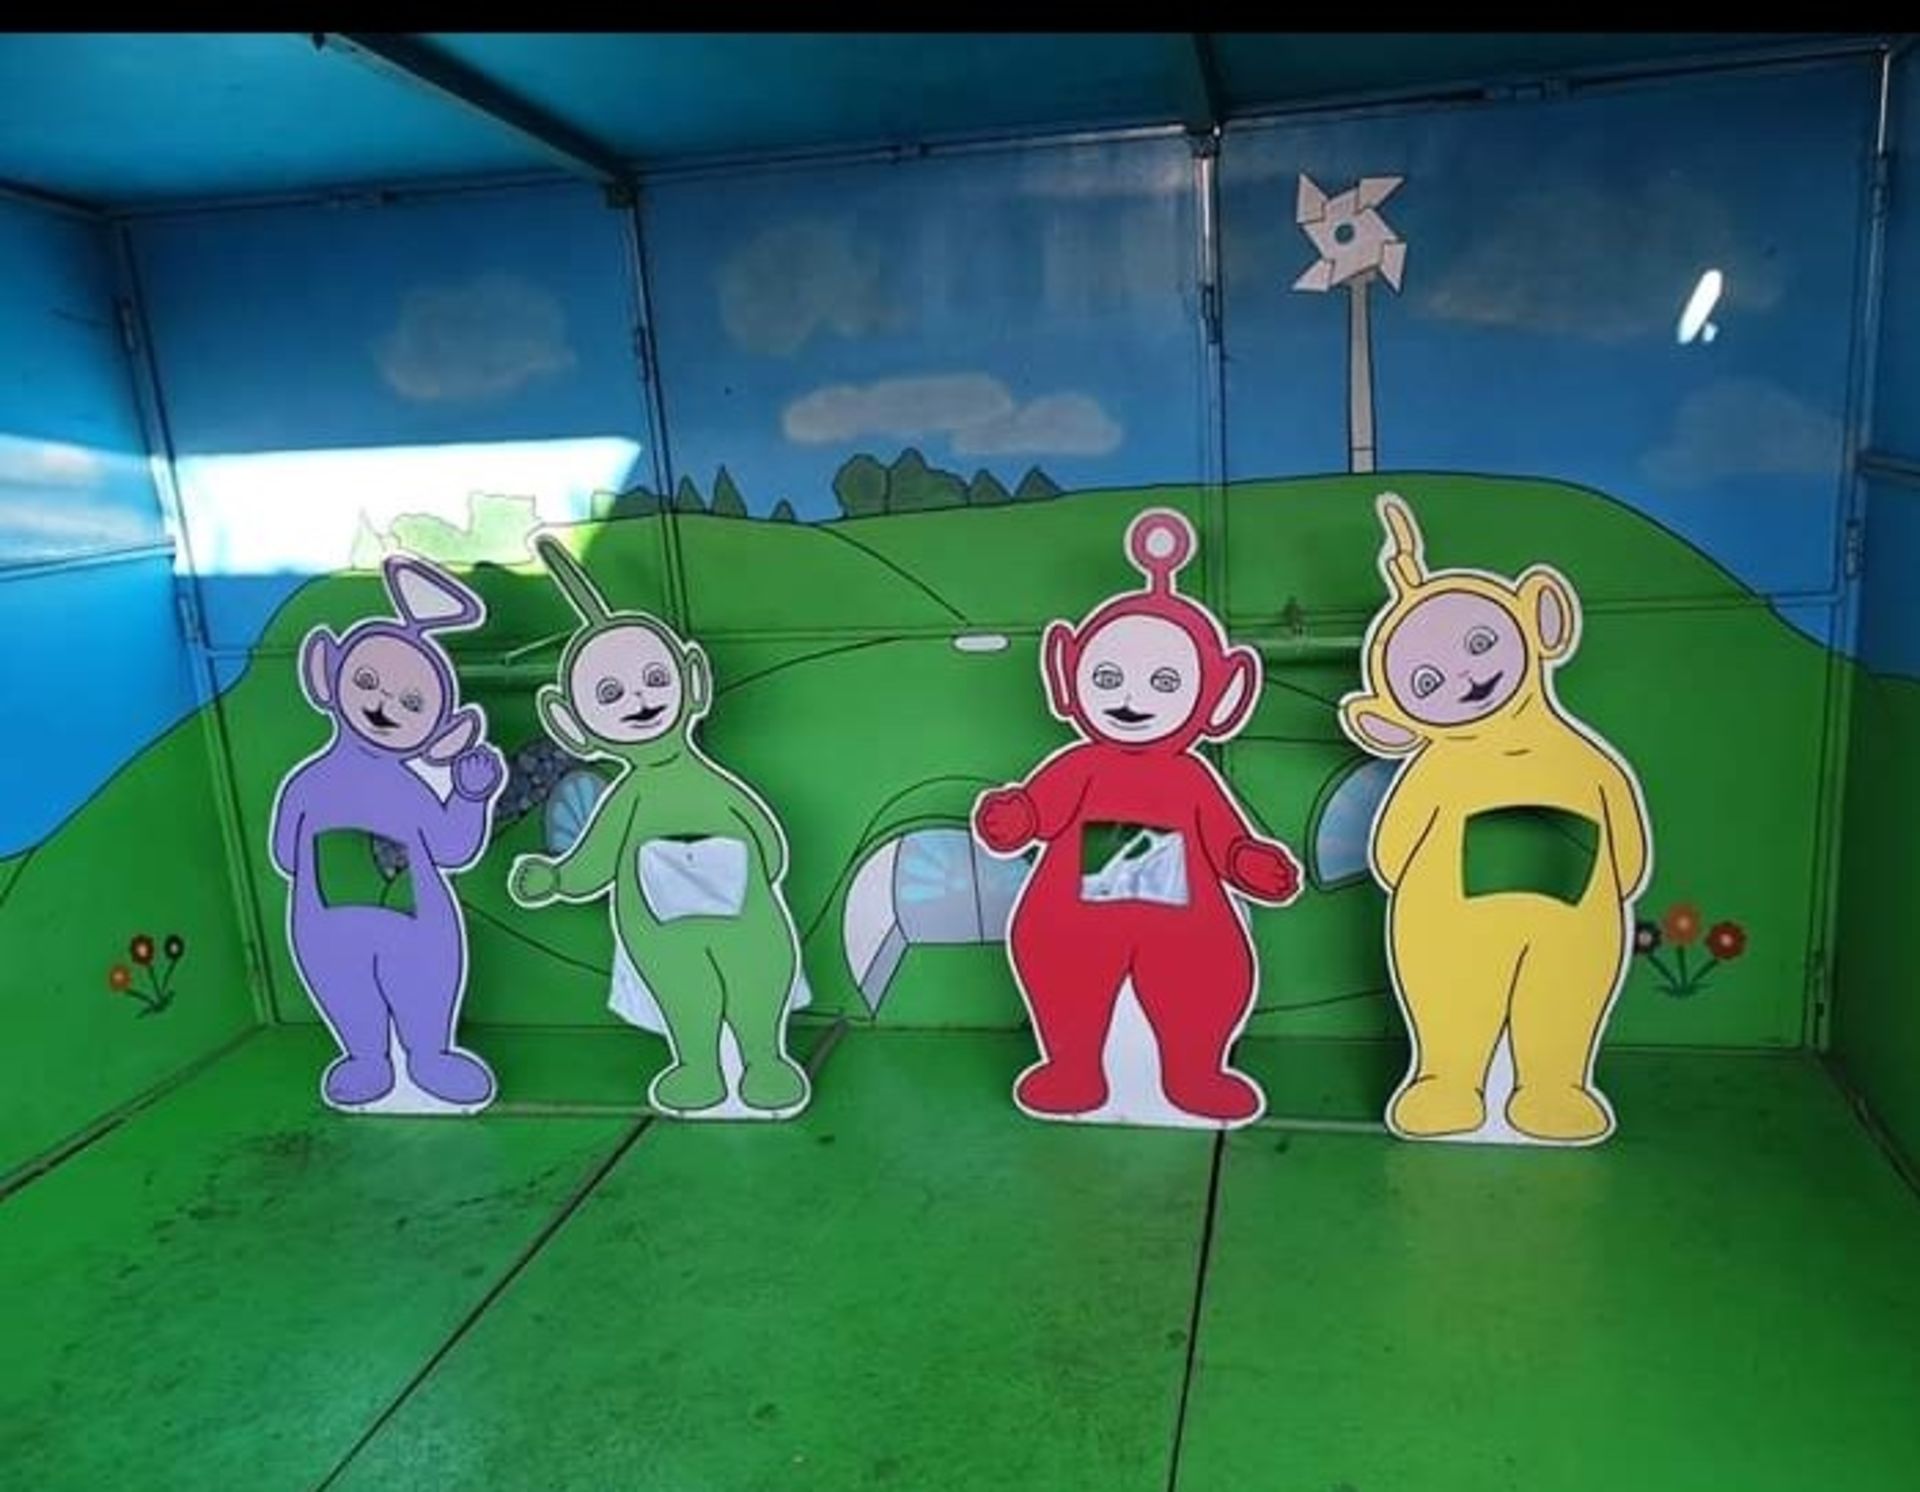 Fairground Teletubbies Side Stall - Image 2 of 4